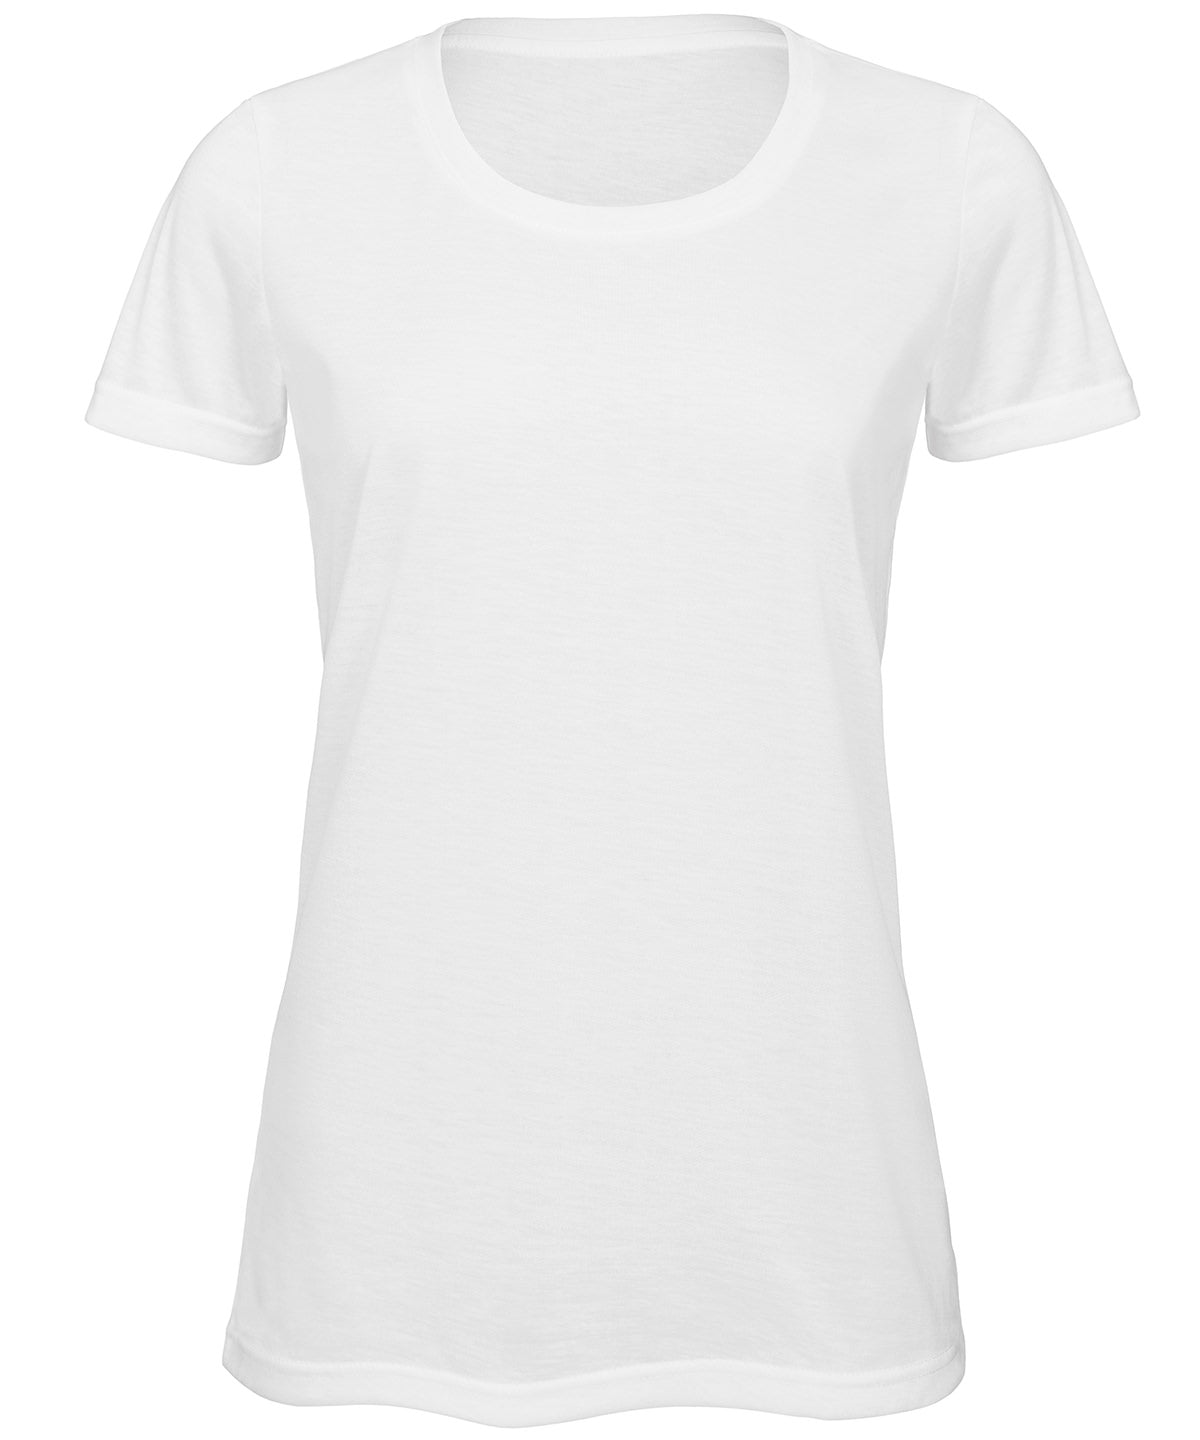 Personalised T-Shirts - White B&C Collection B&C Sublimation /women